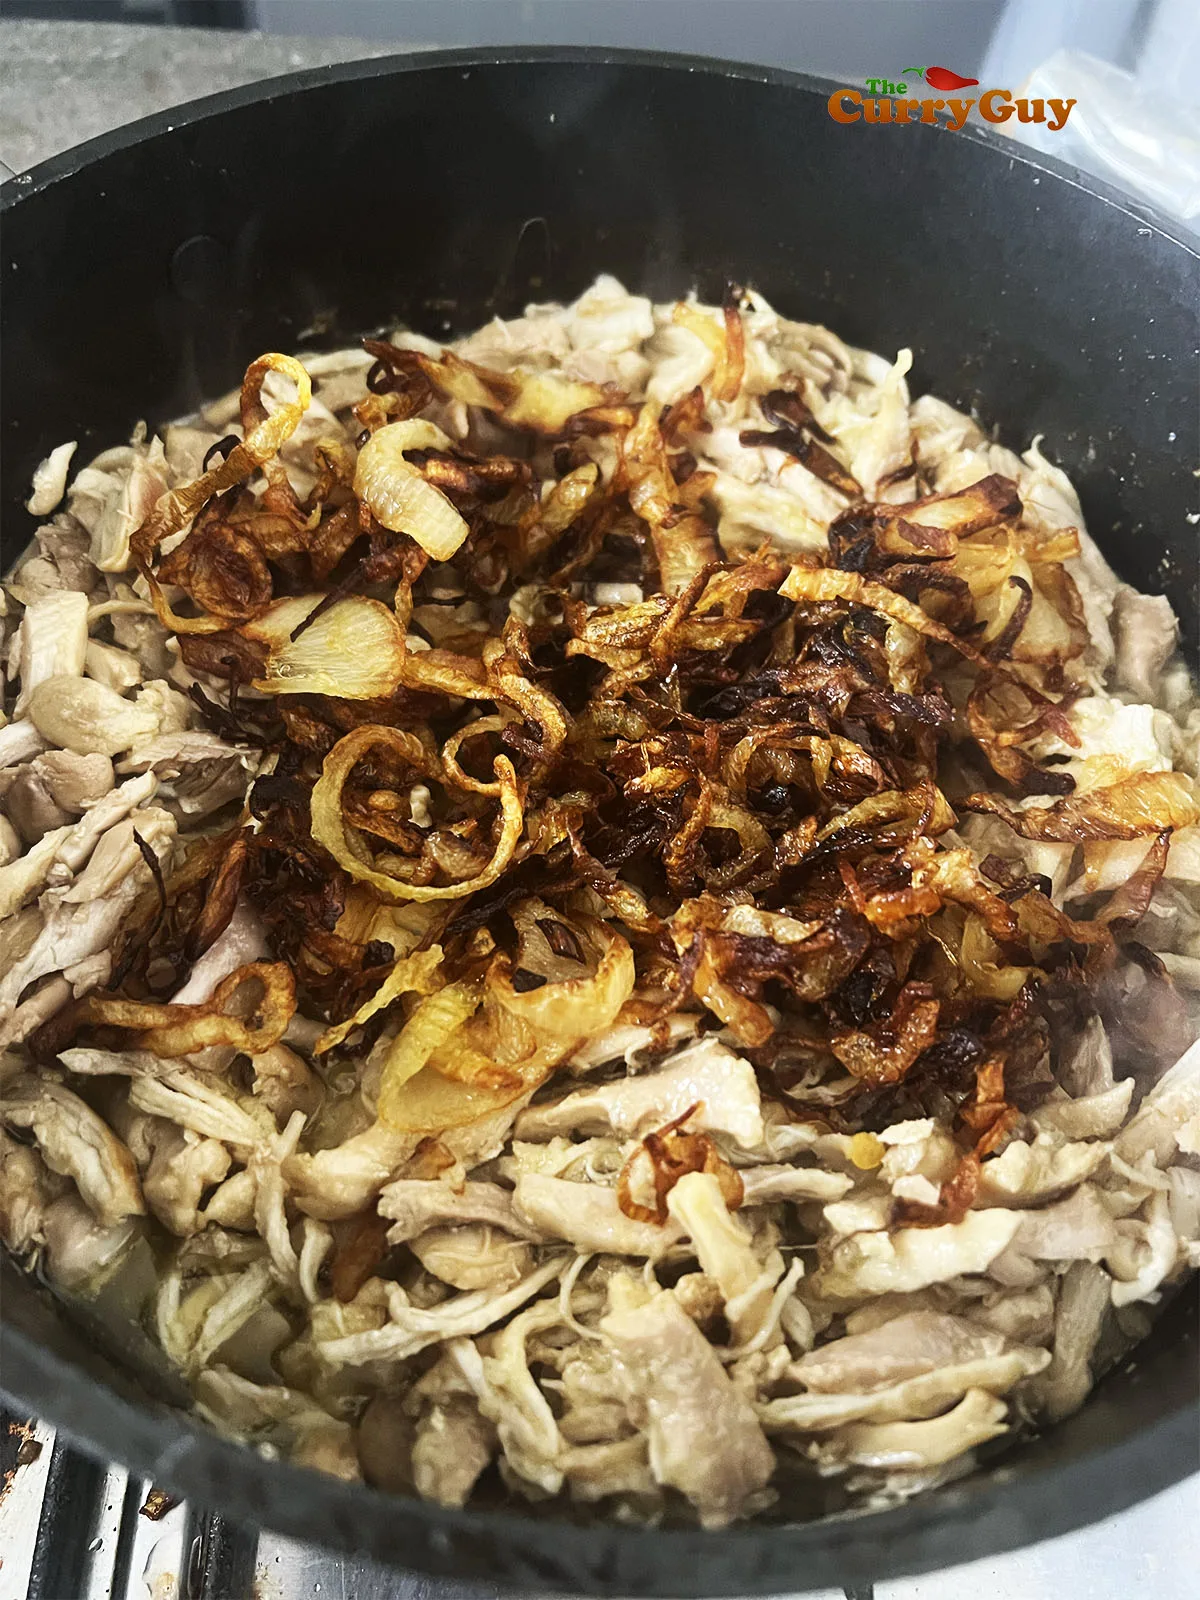 Chicken and fried onions in the pan with the ghee.